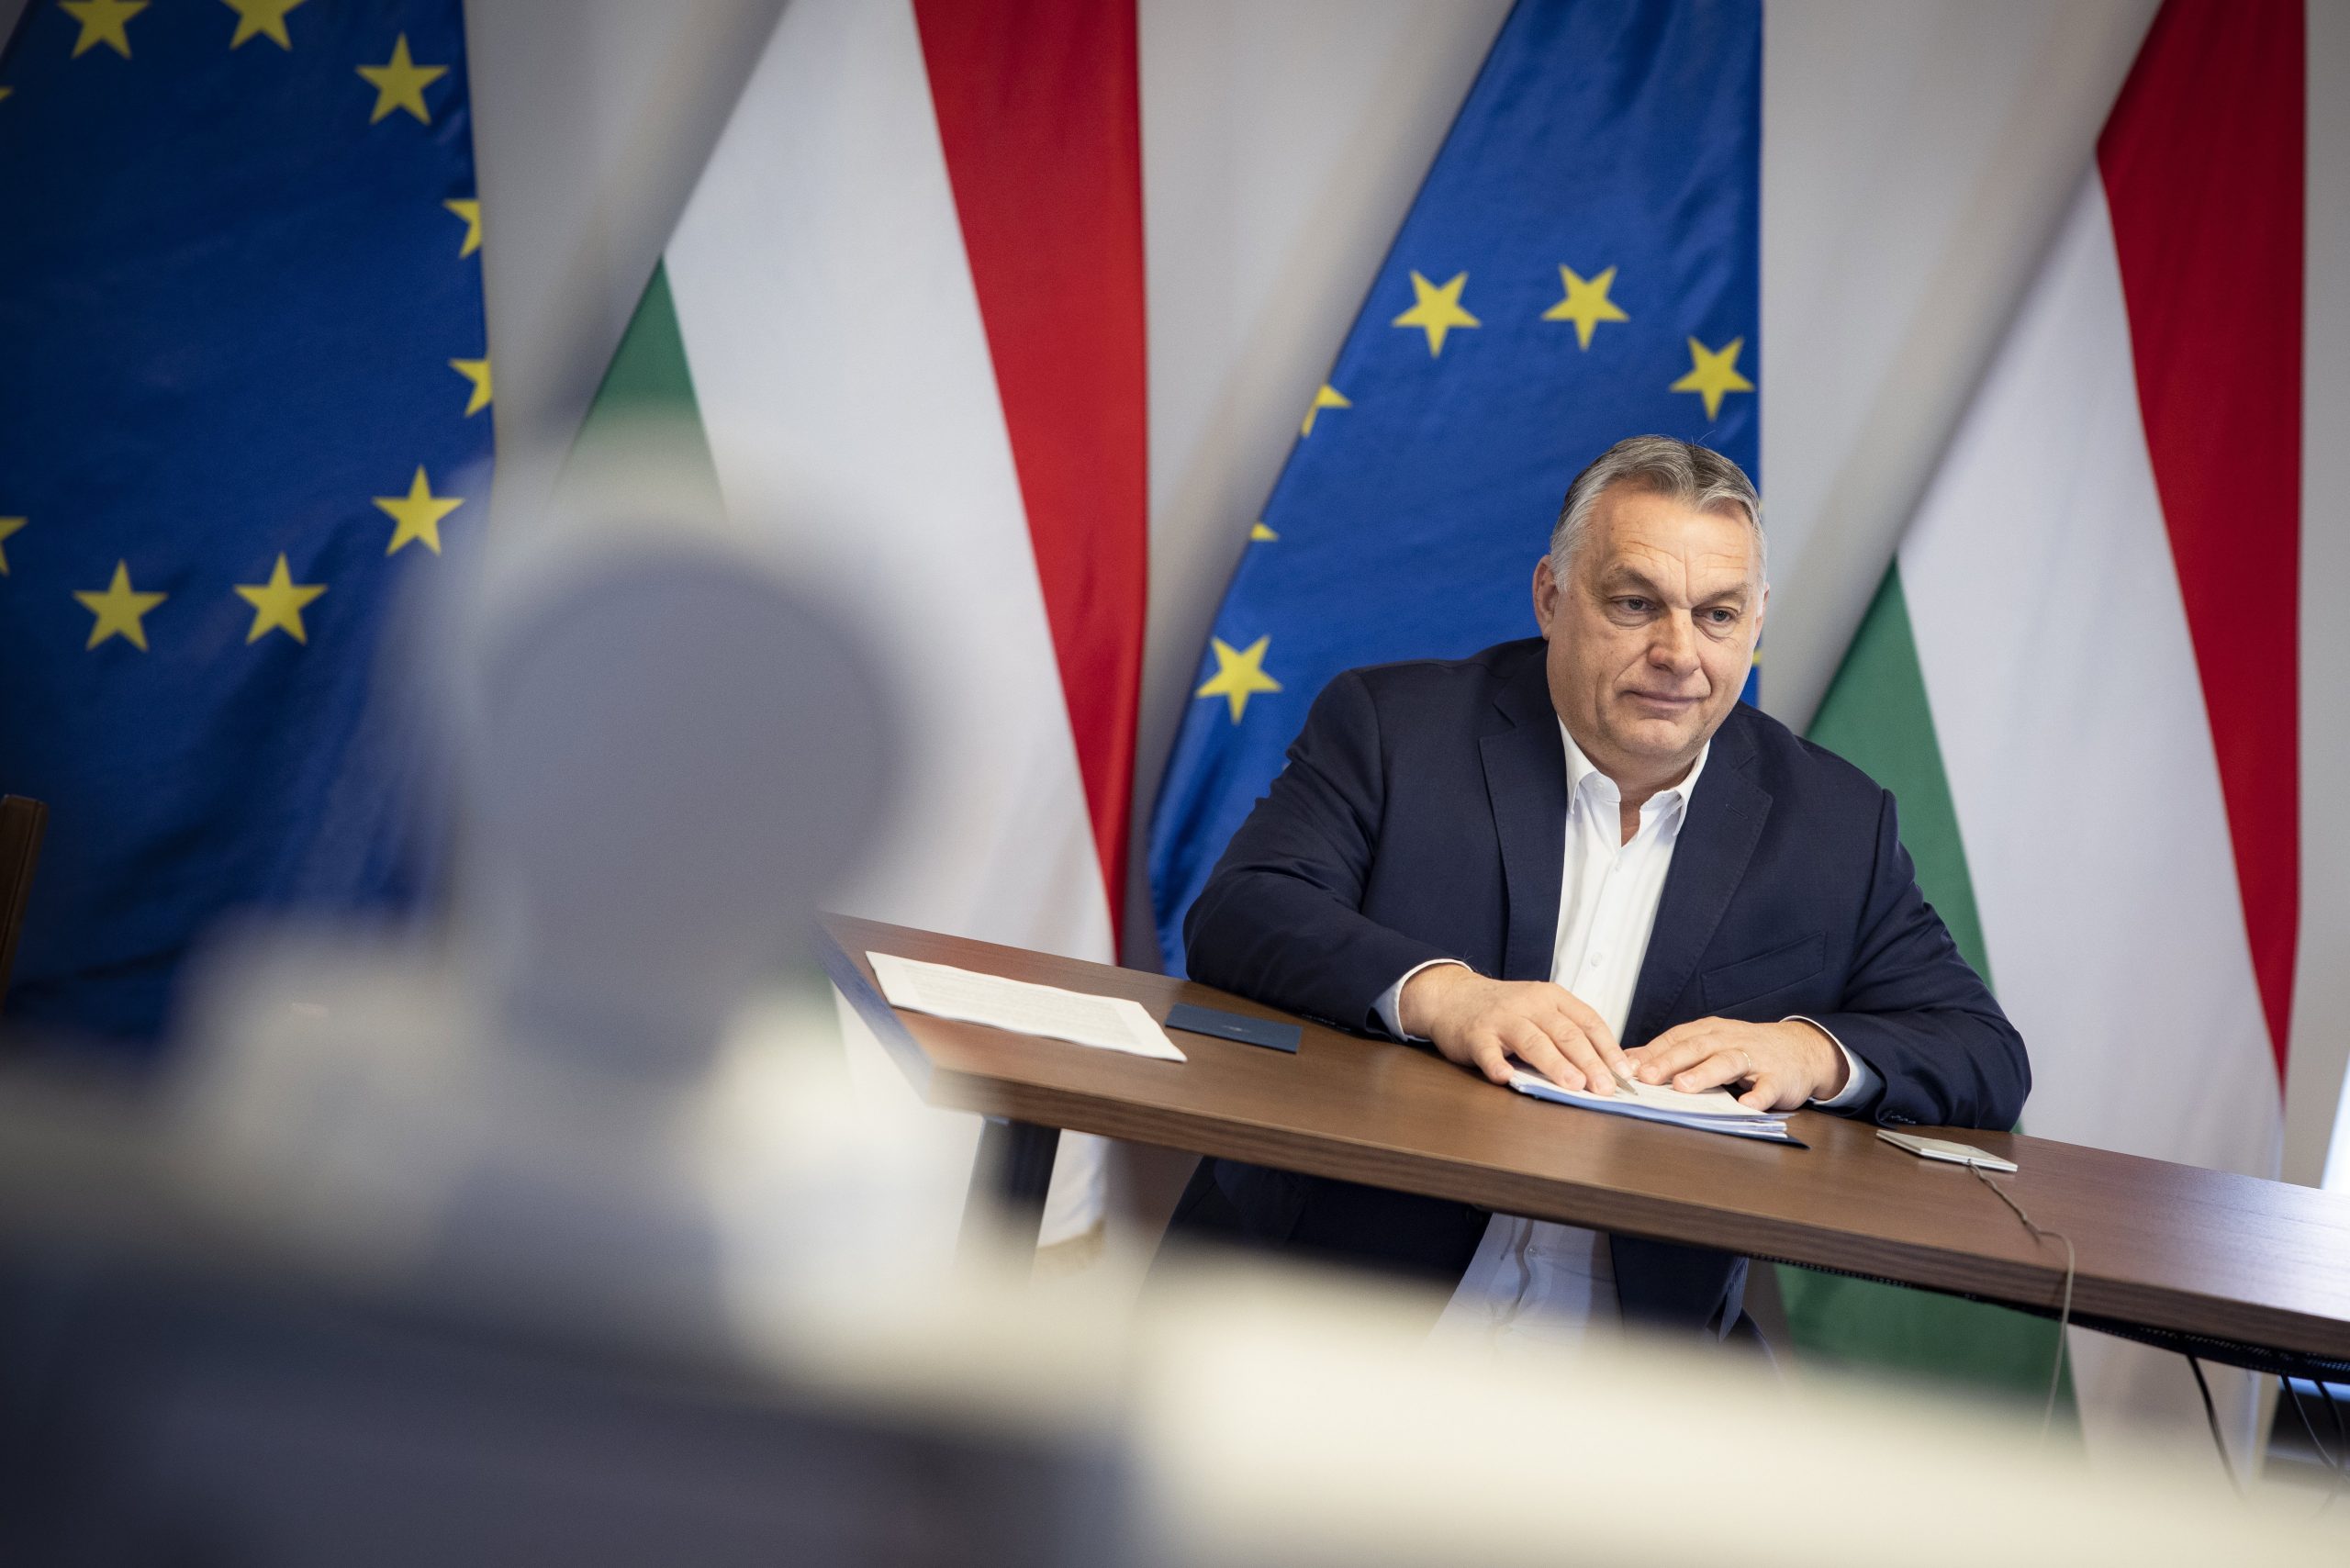 The Greatest Economic Challenges of the Fifth Orbán Government